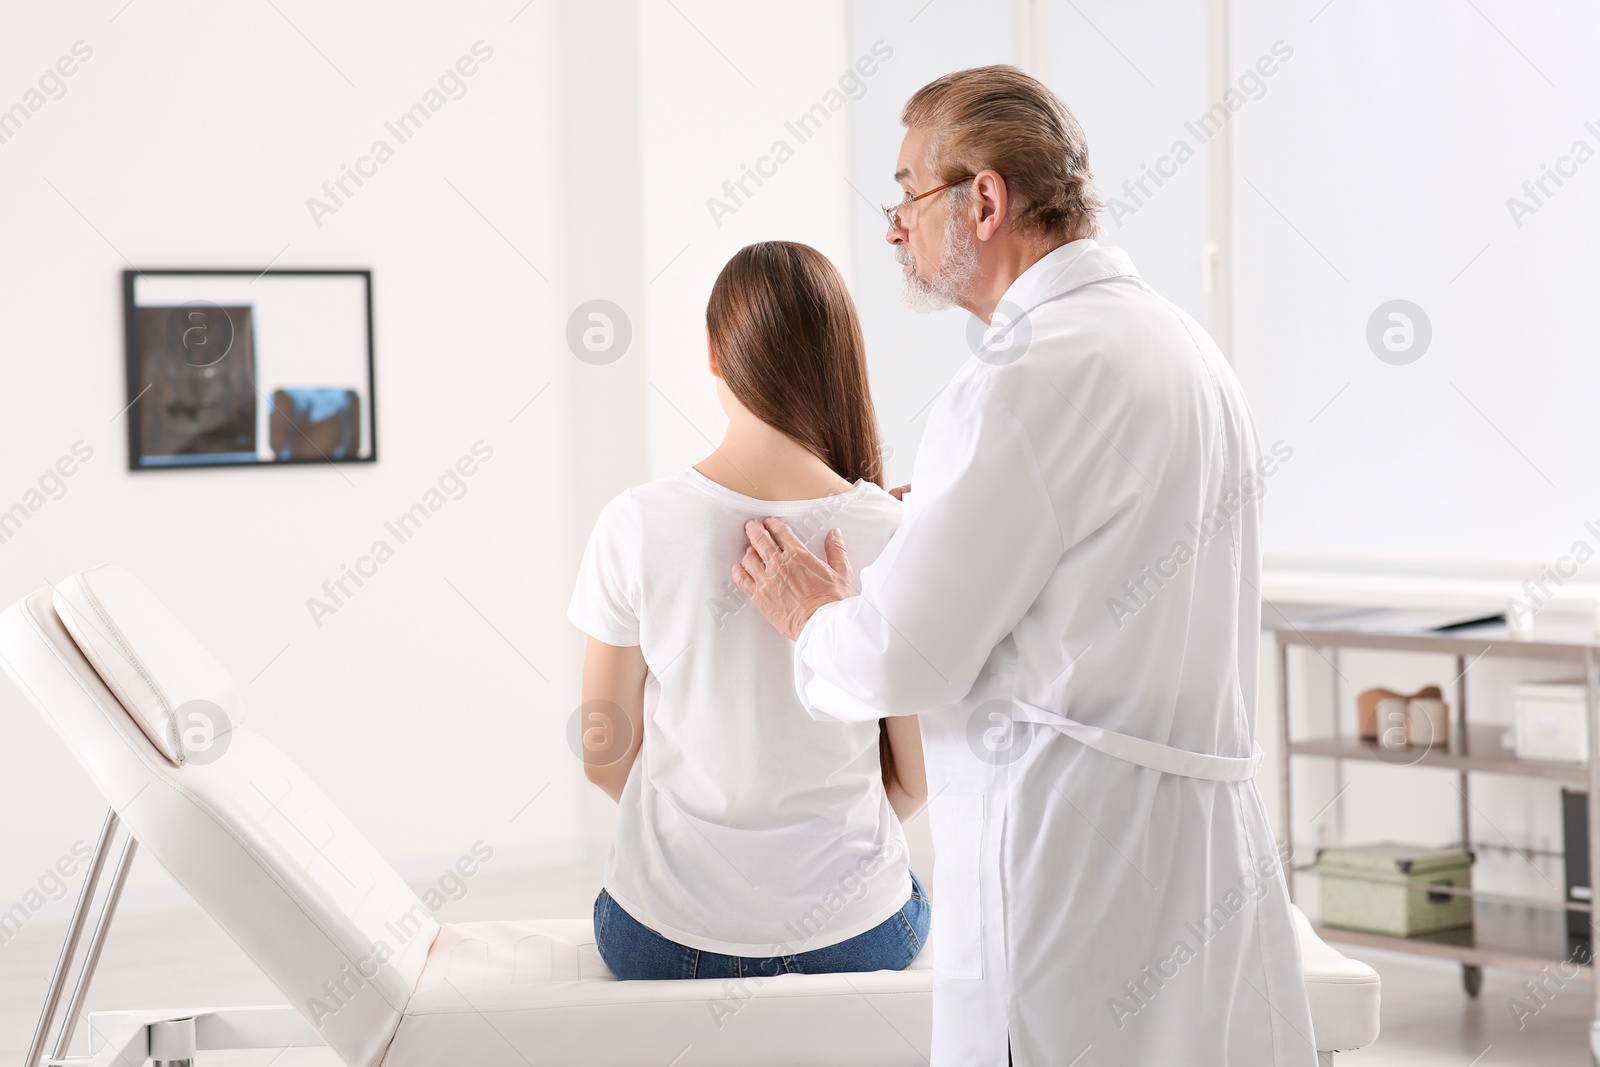 Photo of Professional orthopedist examining patient's back in clinic